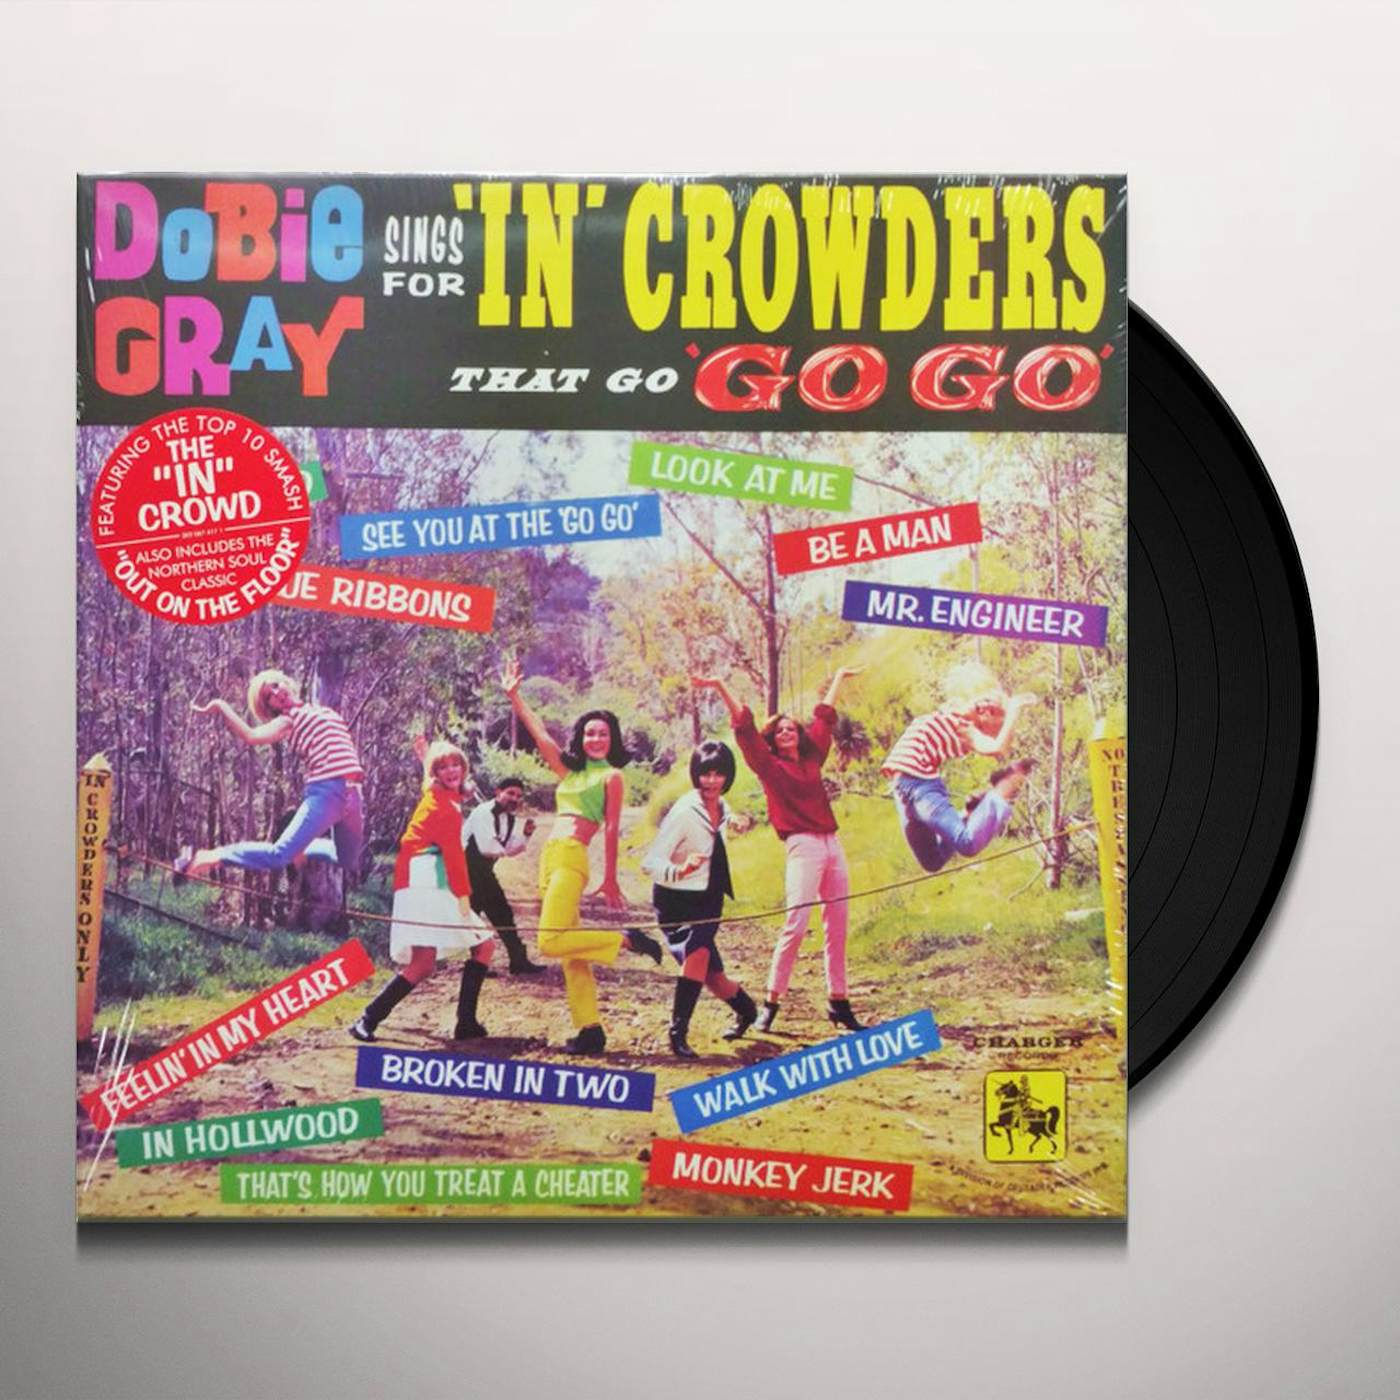 Dobie Gray SINGS FOR IN CROWDERS THAT GO GO-GO Vinyl Record